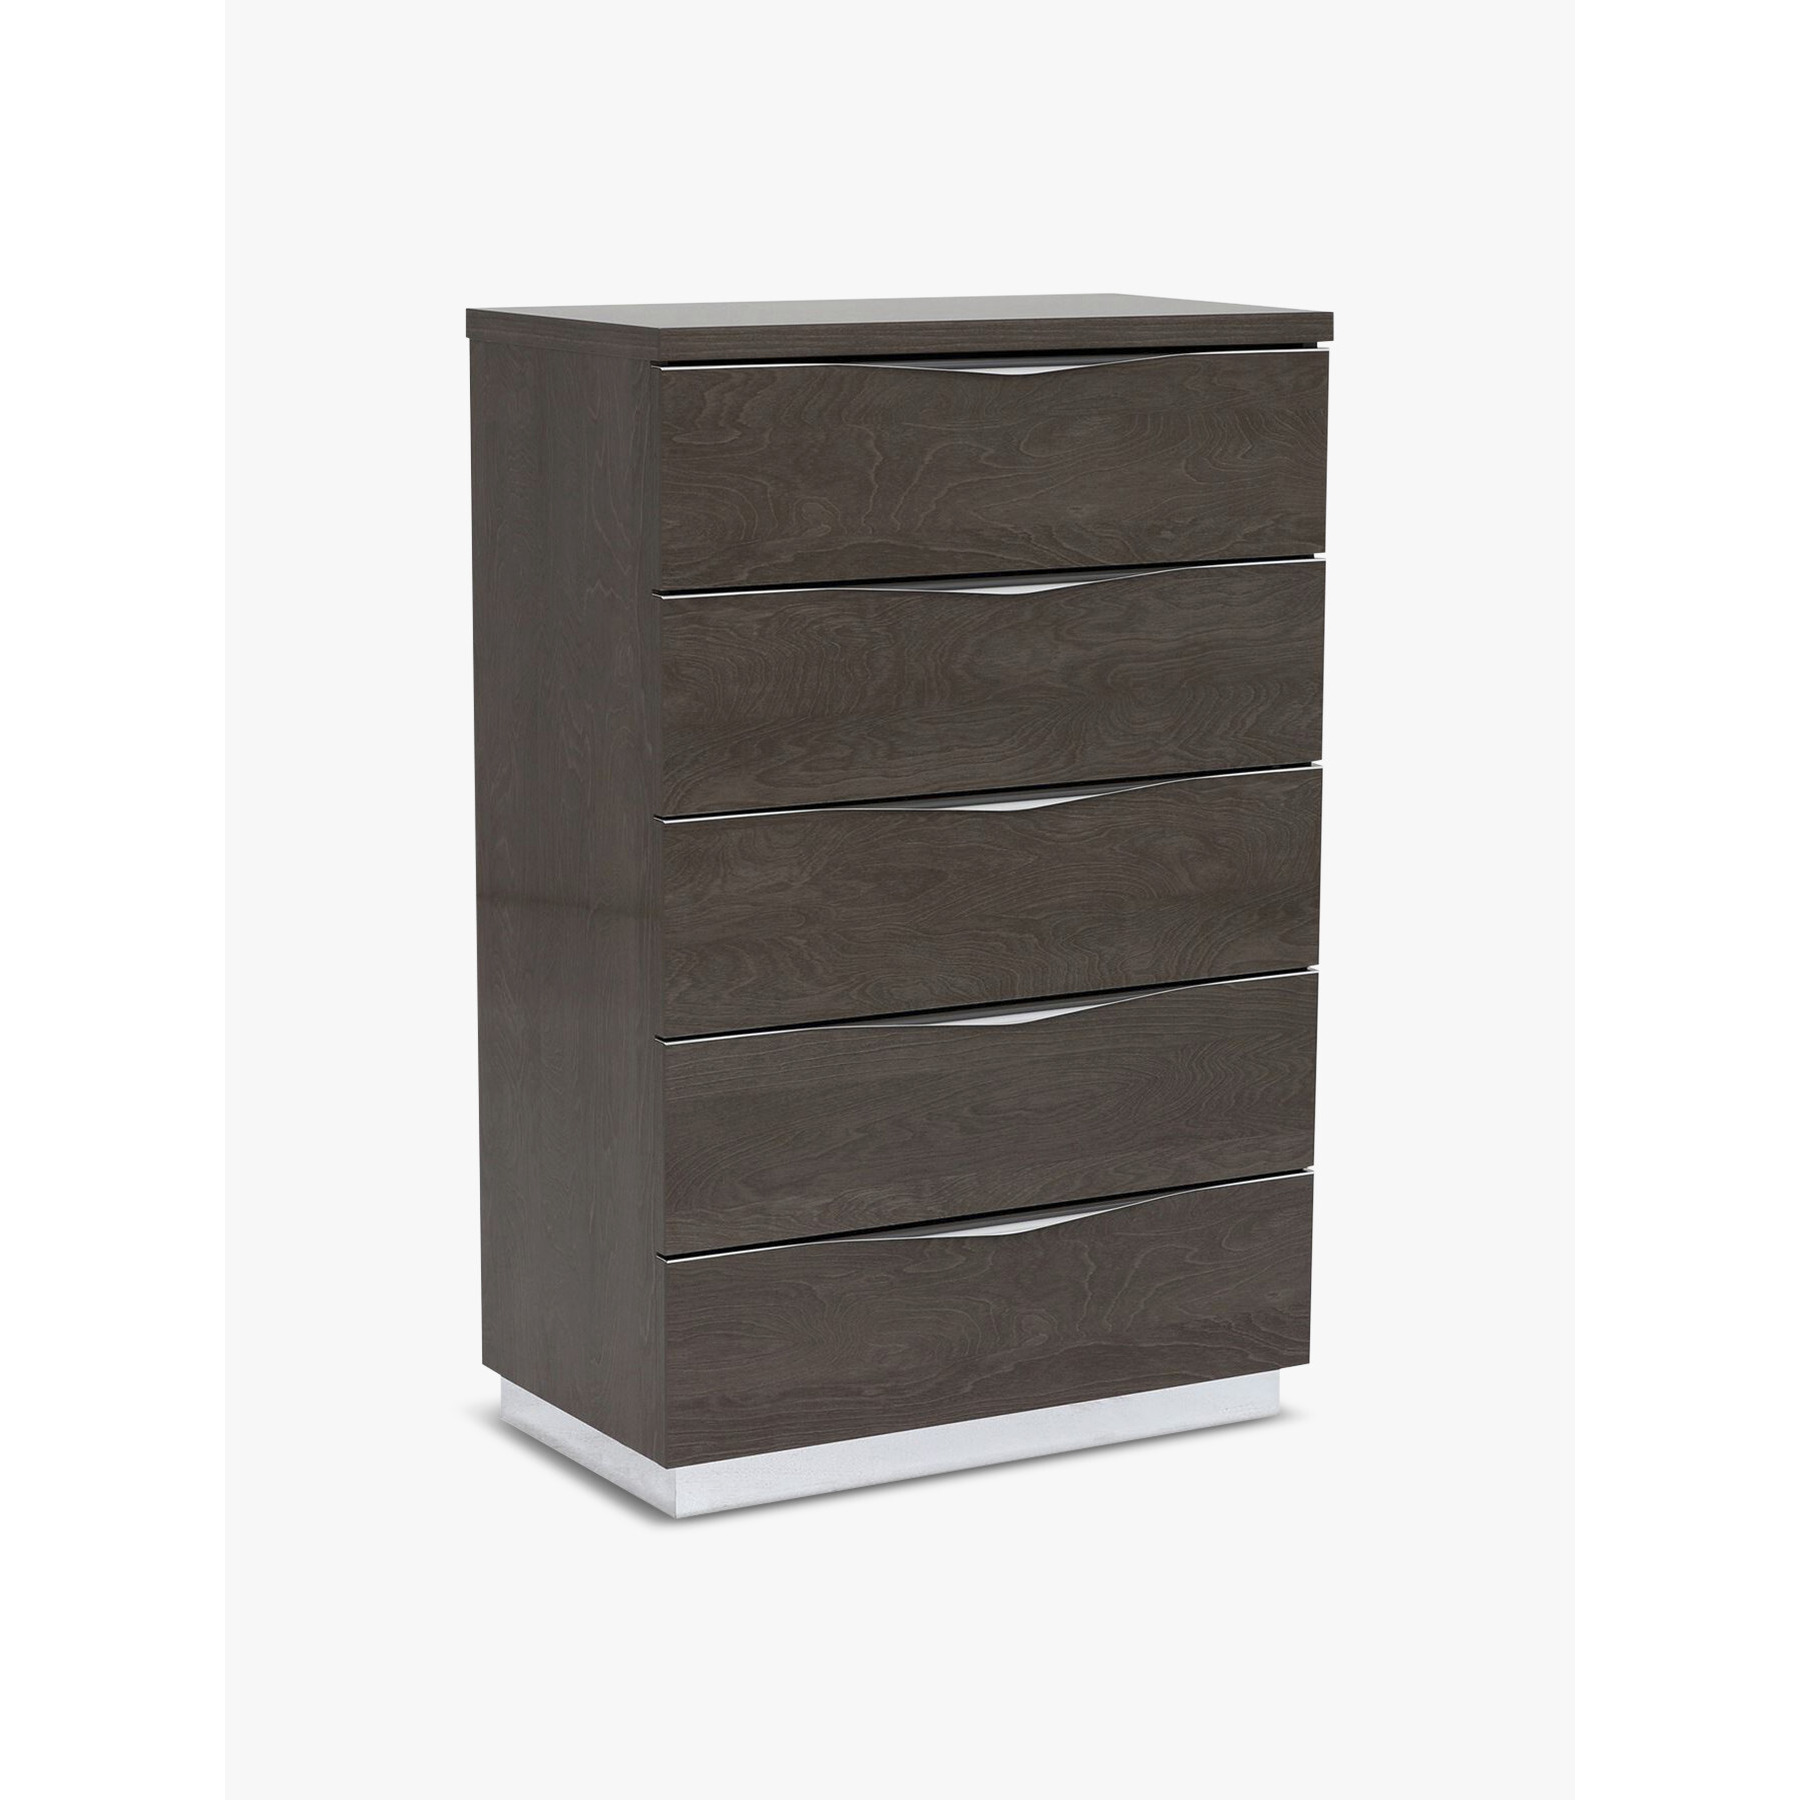 Barker and Stonehouse Lutyen 5 Drawer Tallboy, Grey and Taupe - image 1